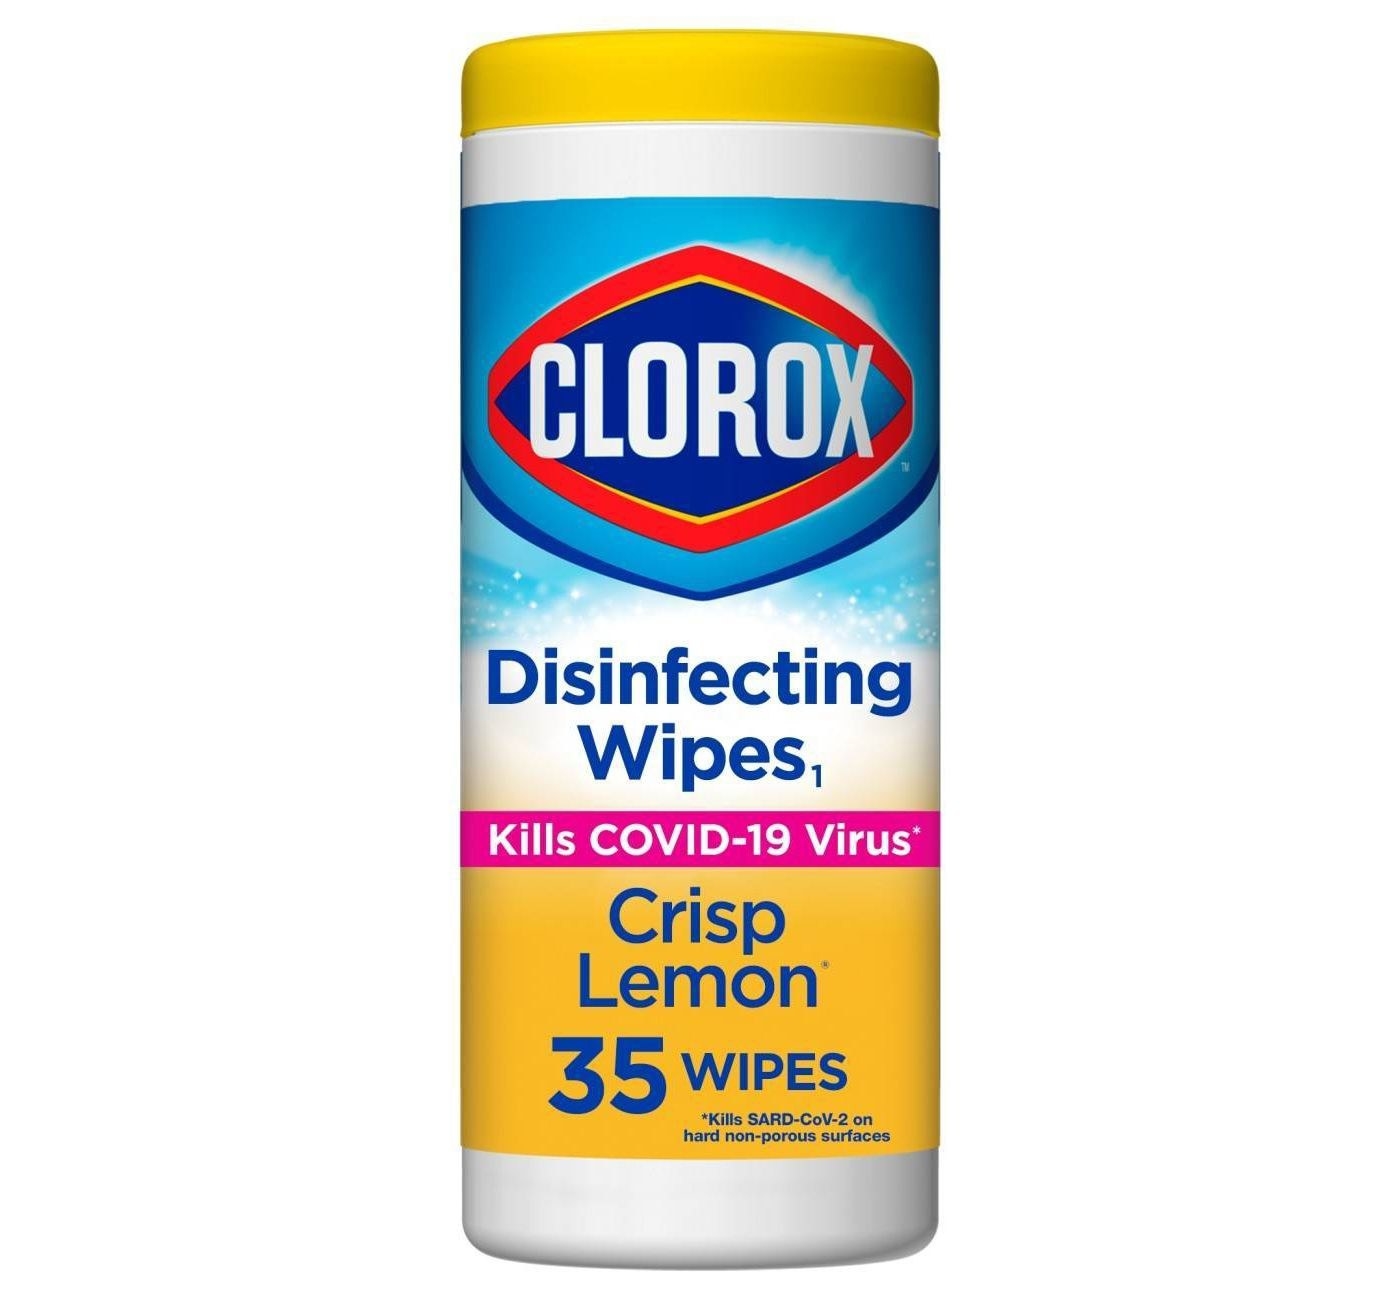 A yellow and package of wipes